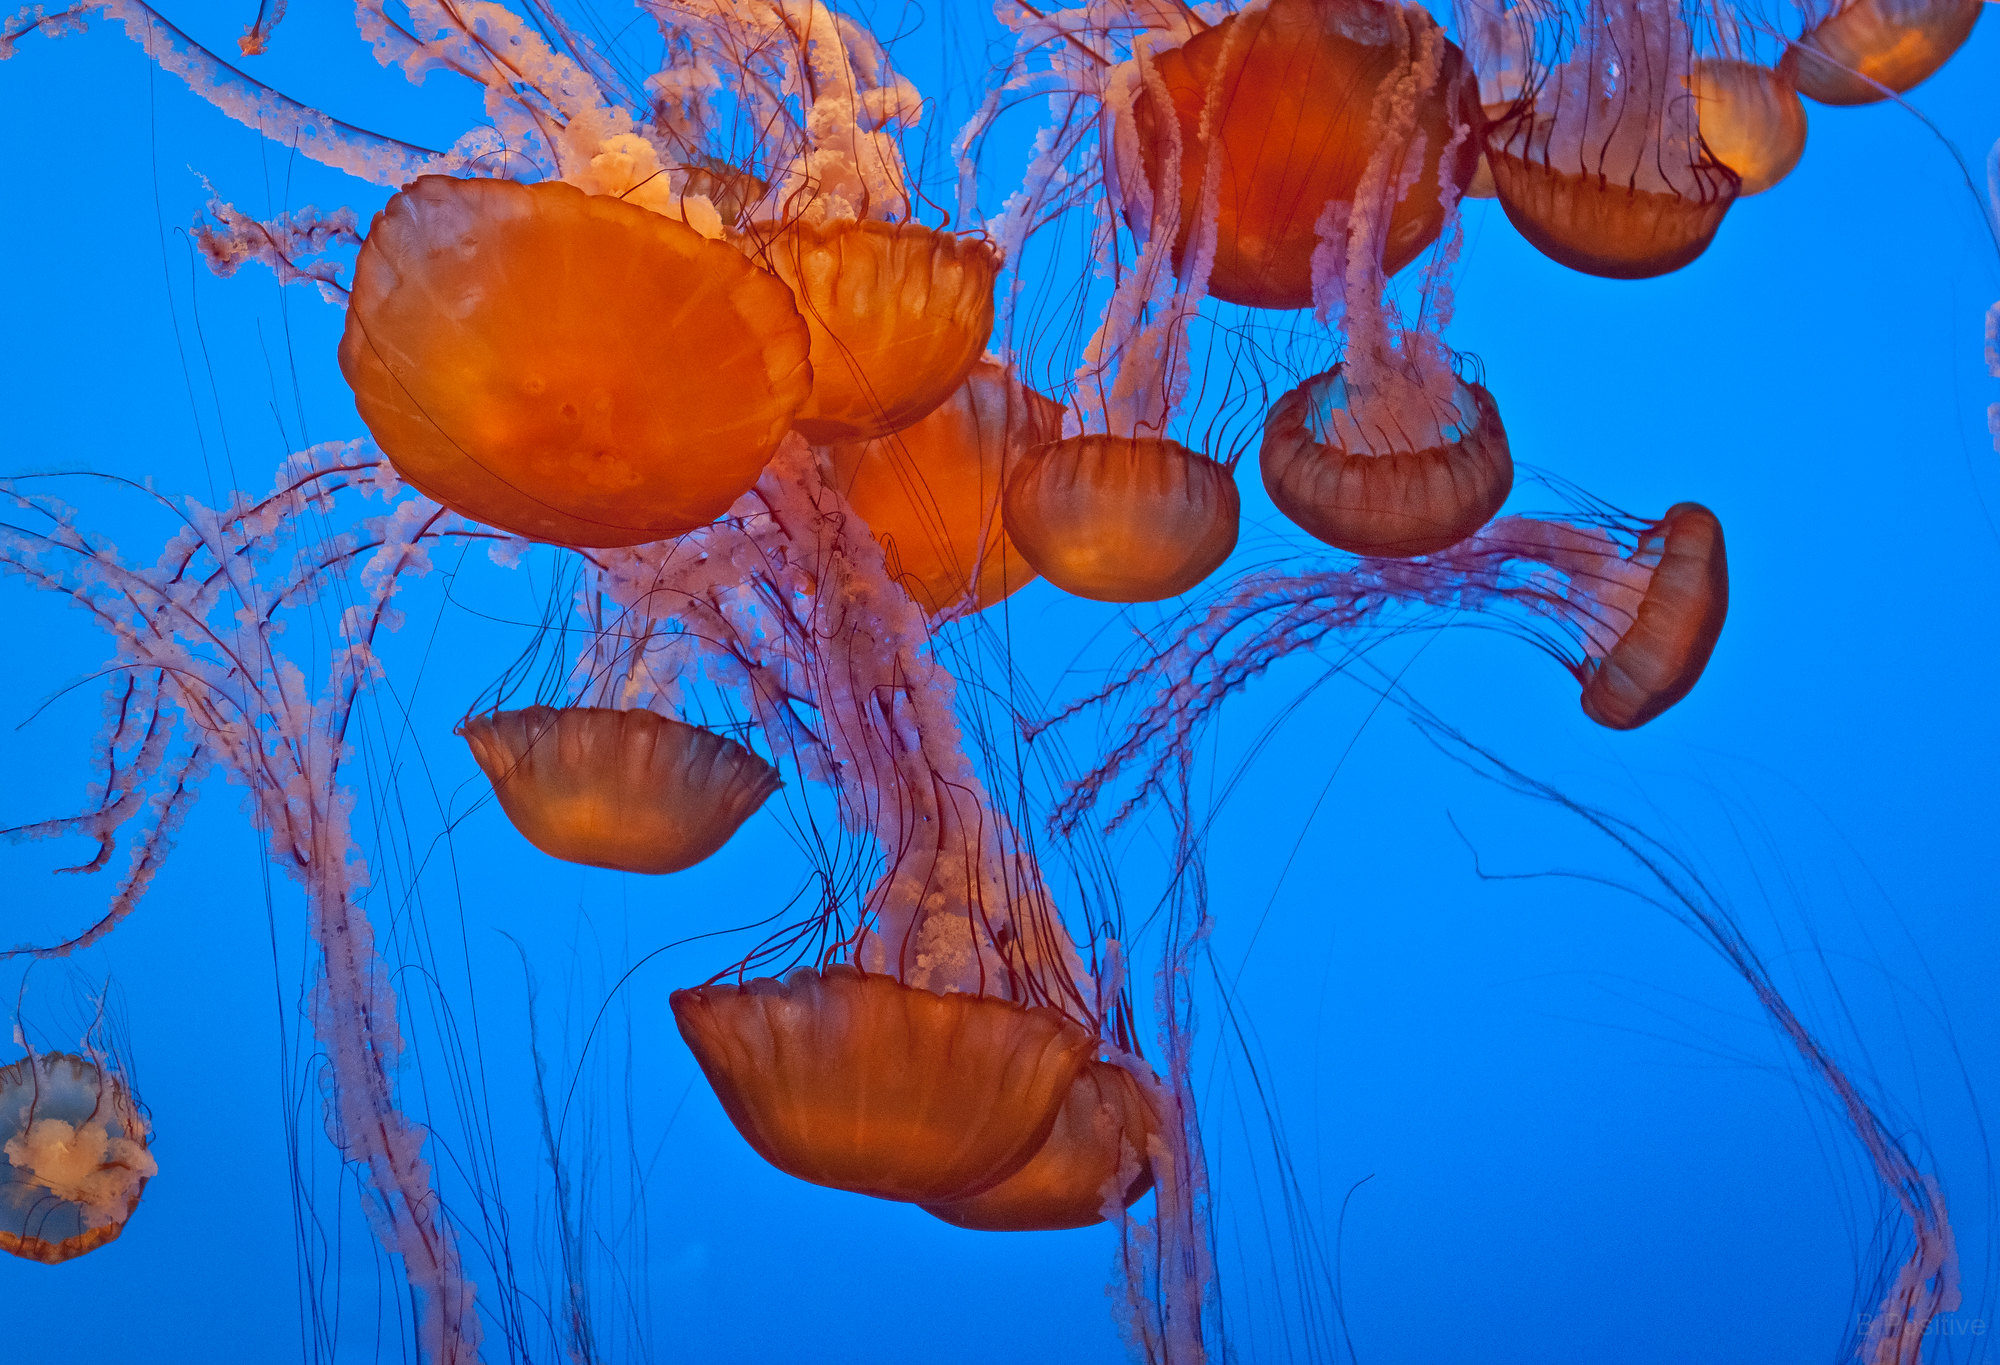 Jellyfish appear orange against a blue background